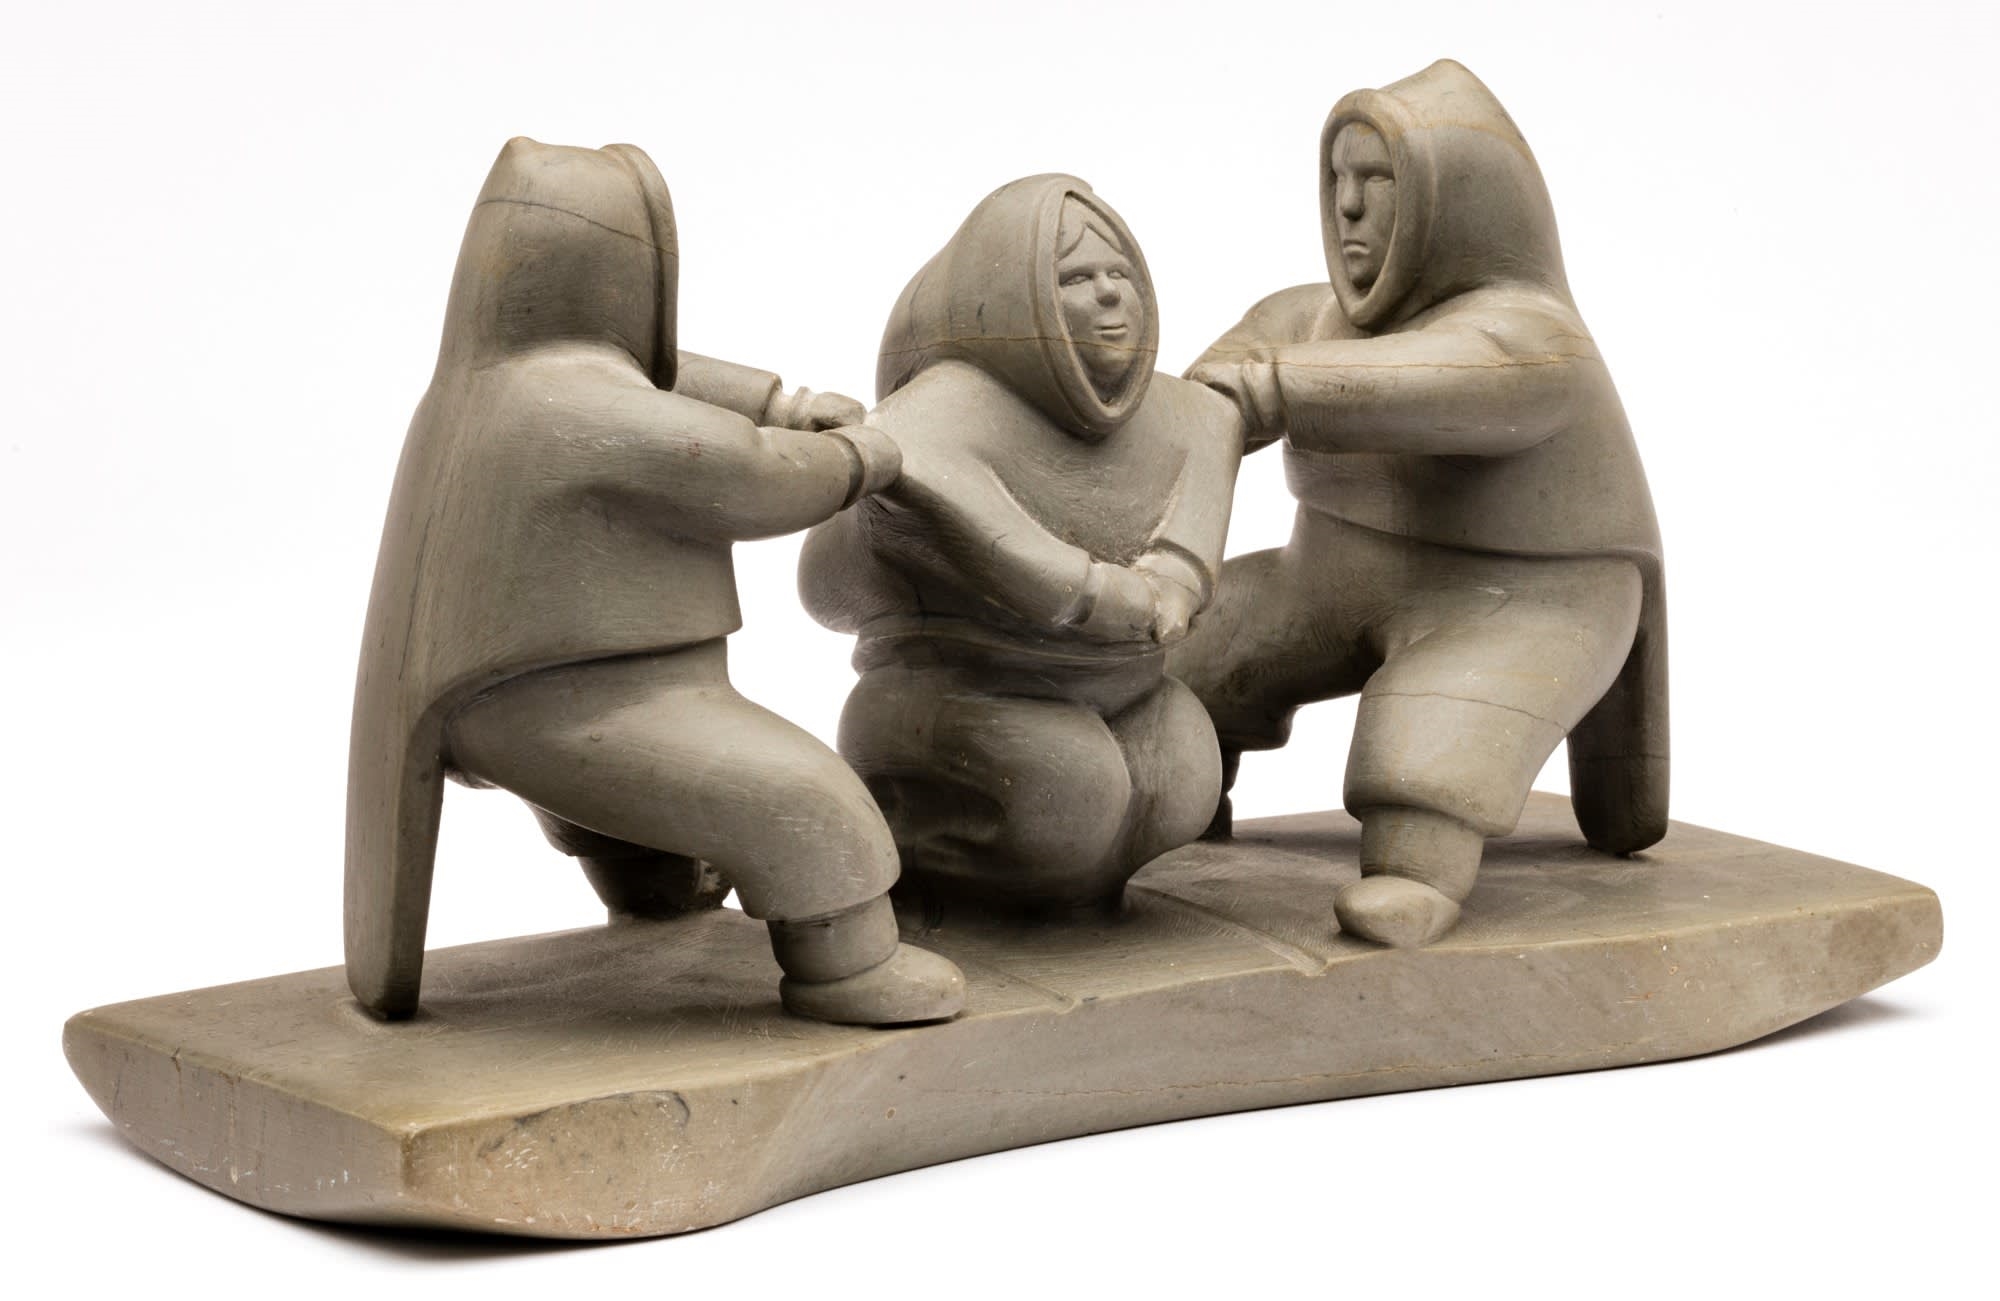 Artwork by Victor Ekootak, Fighting over a Woman, Made of stone